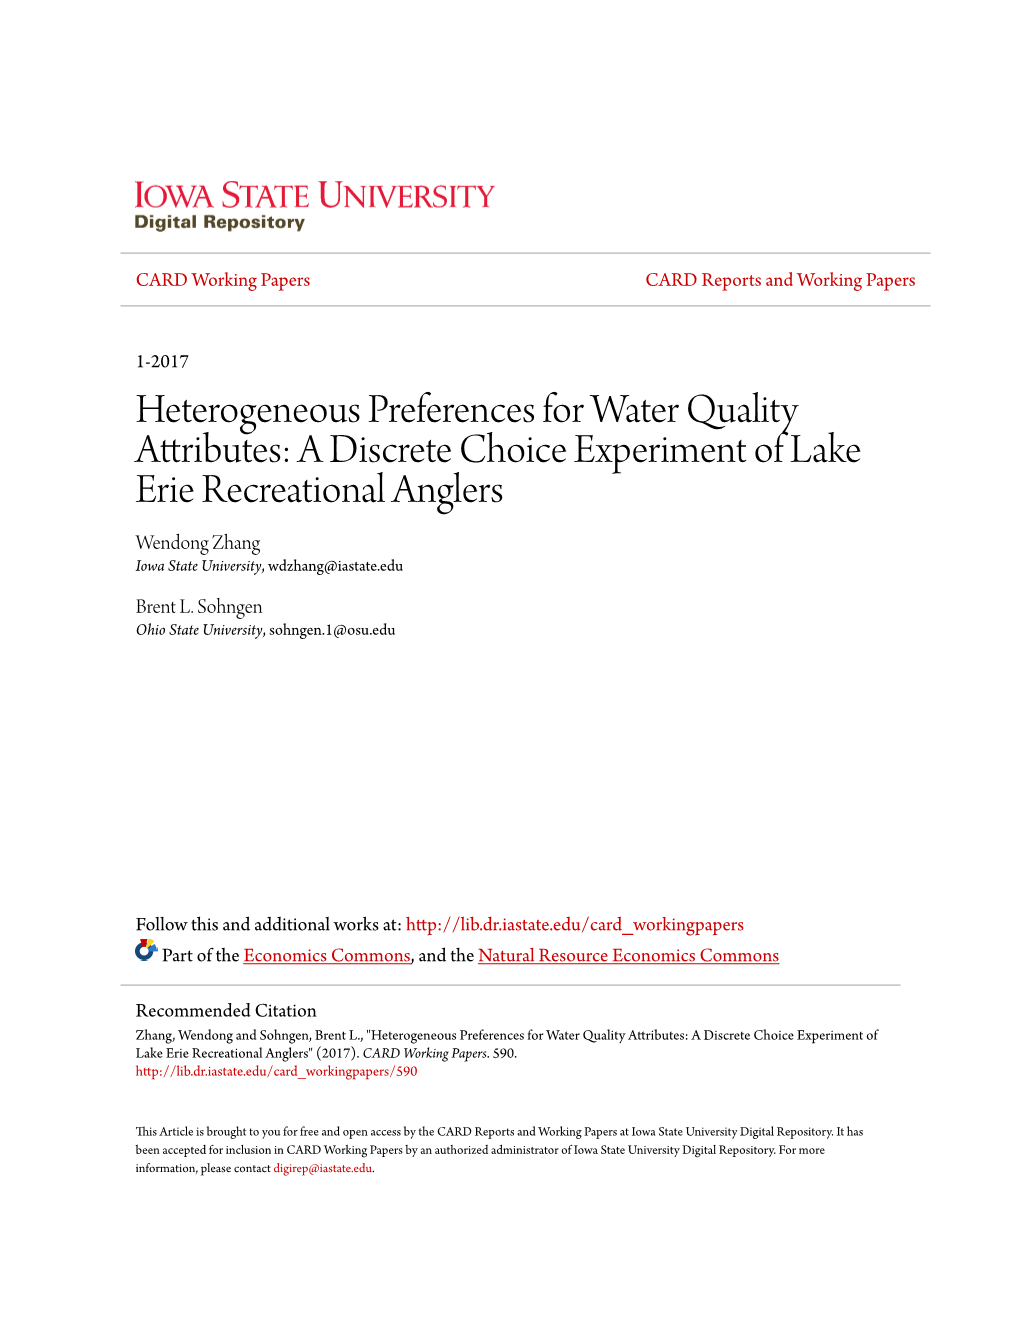 Heterogeneous Preferences for Water Quality Attributes: a Discrete Choice Experiment of Lake Erie Recreational Anglers